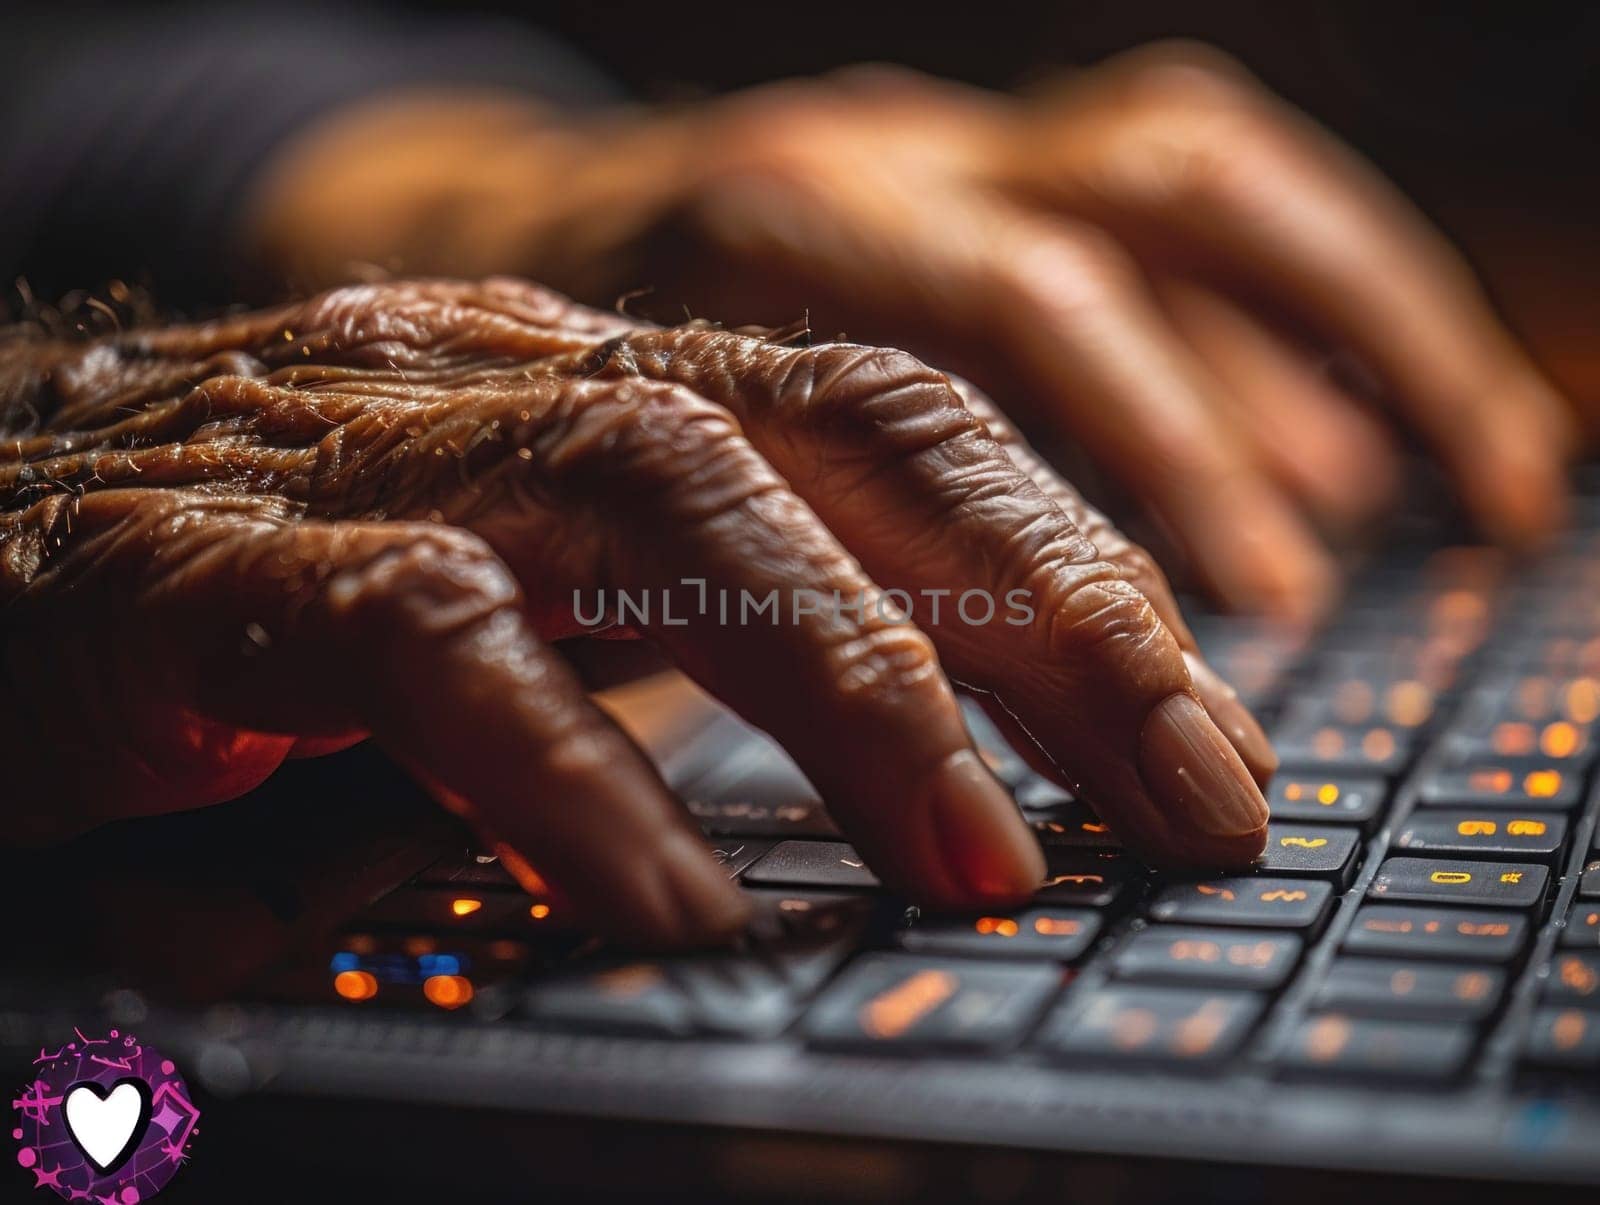 A close up of a person focused on typing on a laptop keyboard.